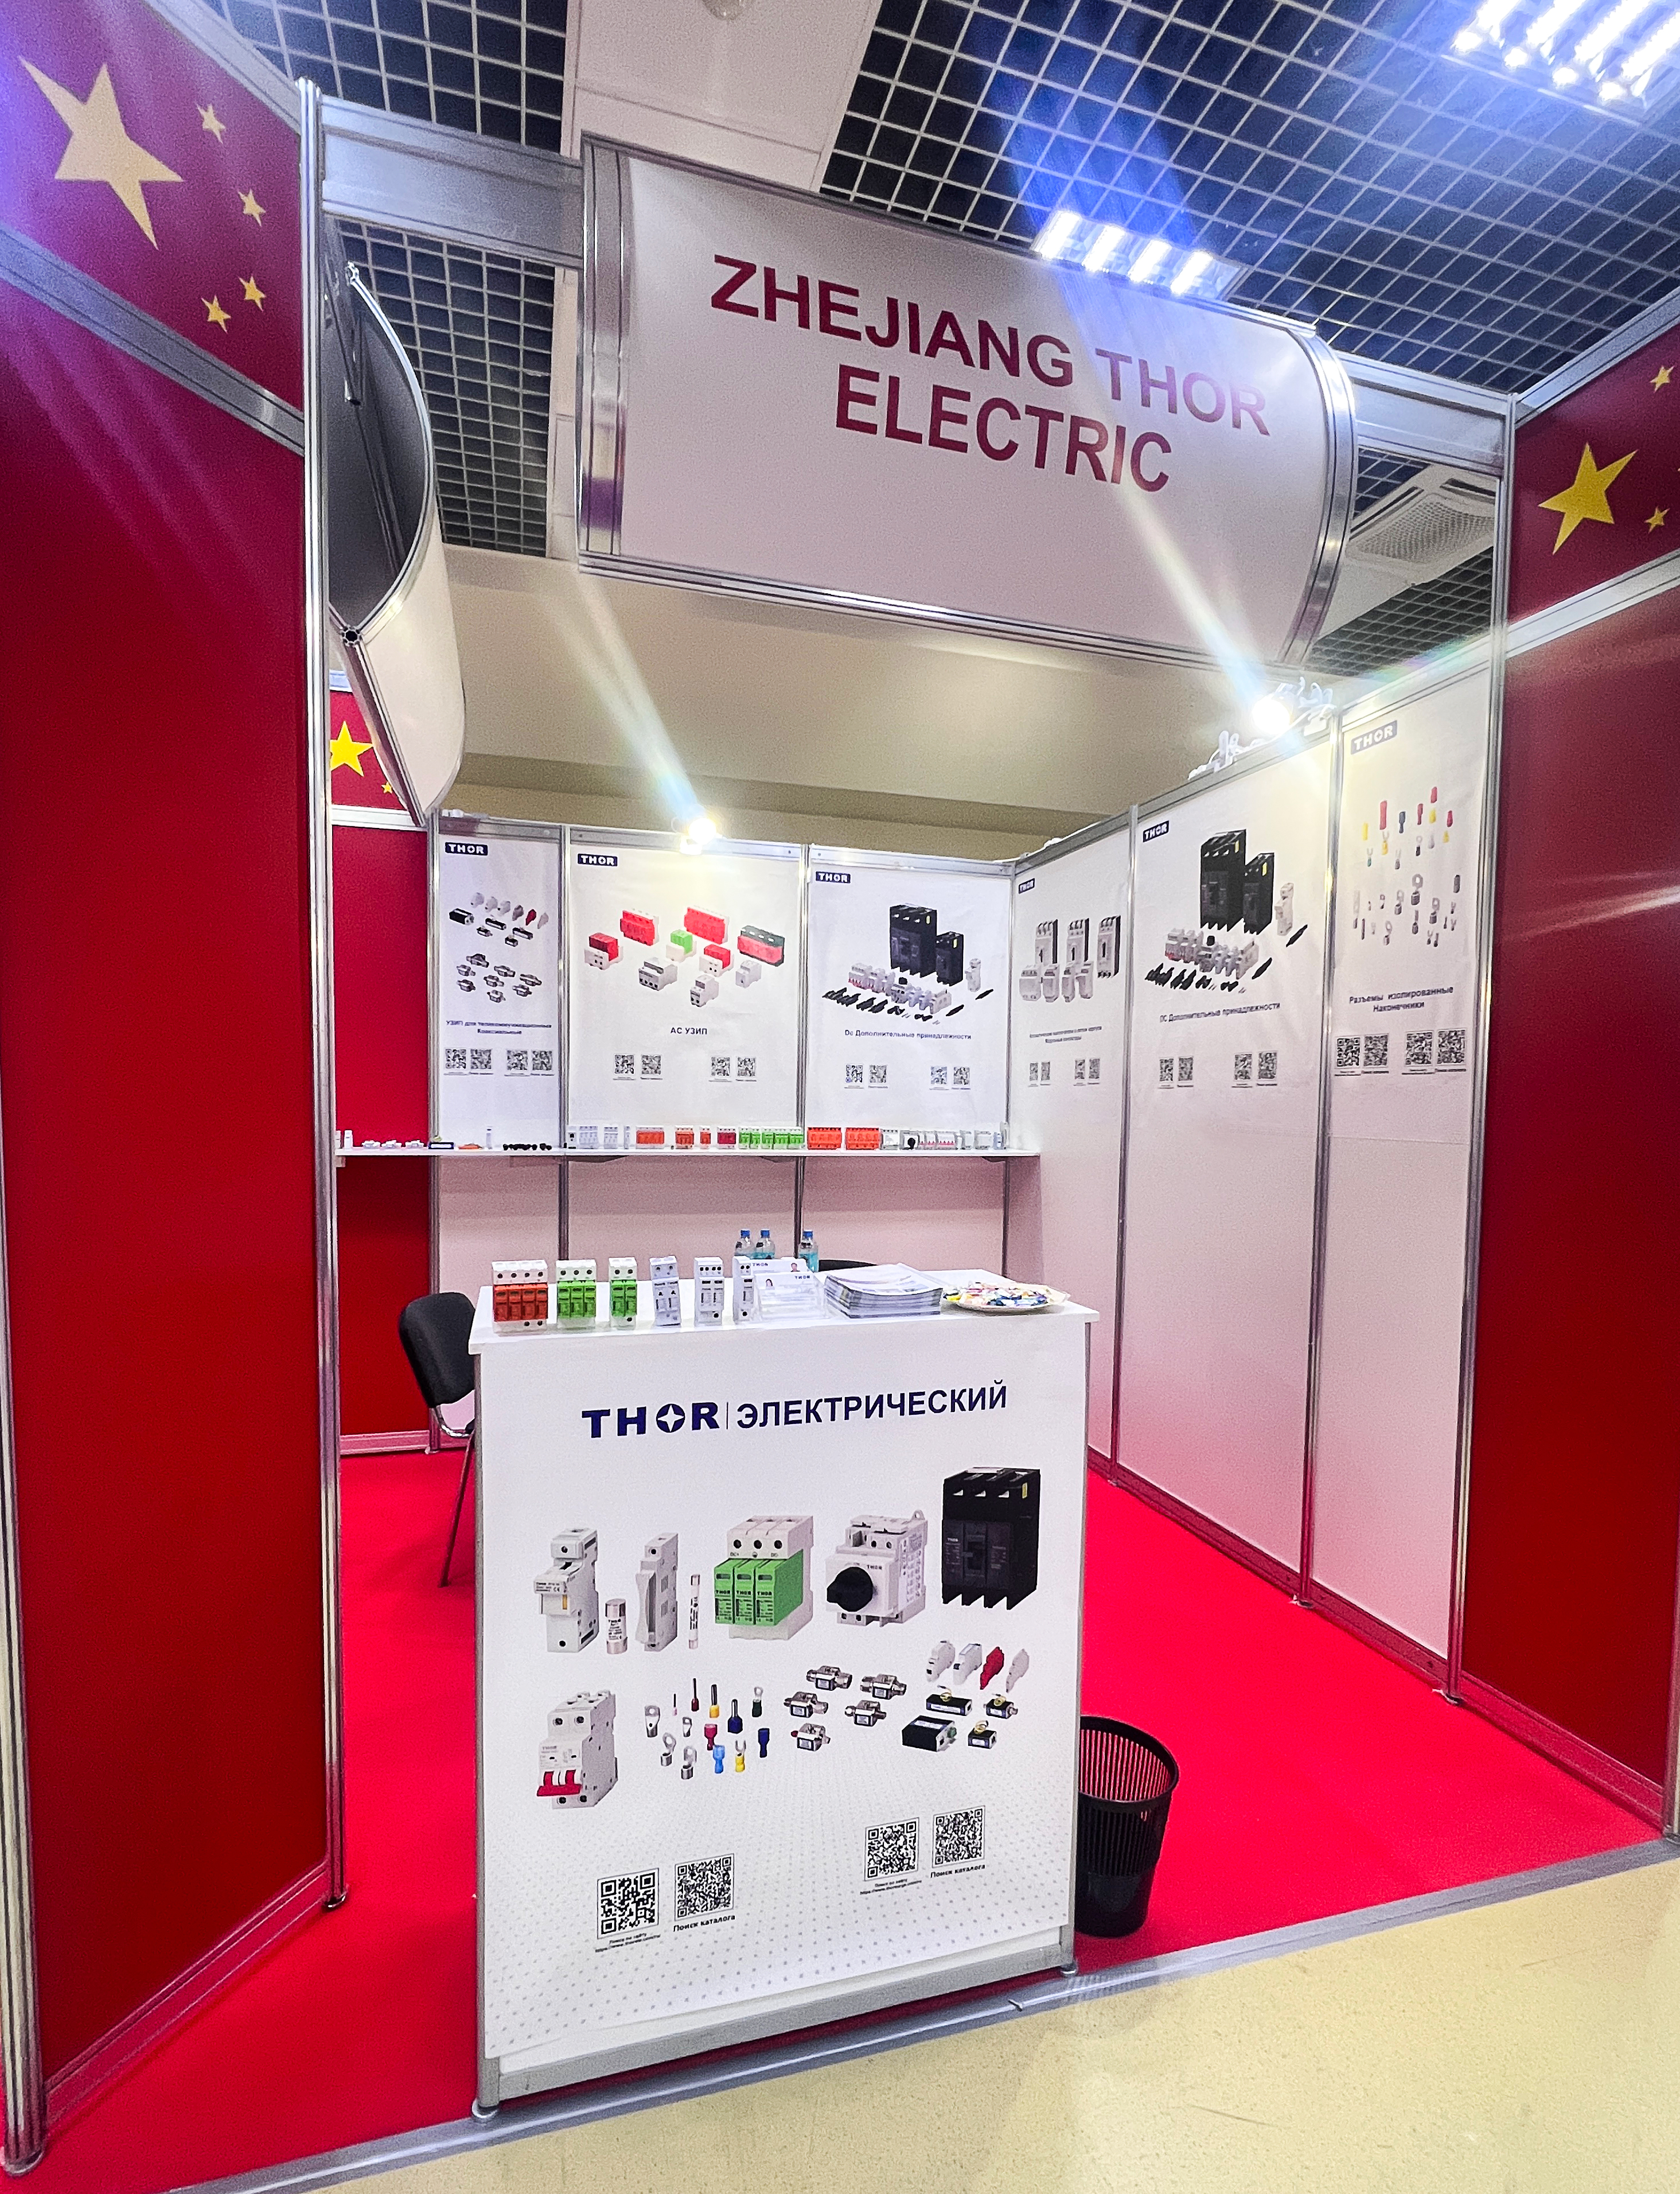 Significance of the Expo in the Power Electronics Industry